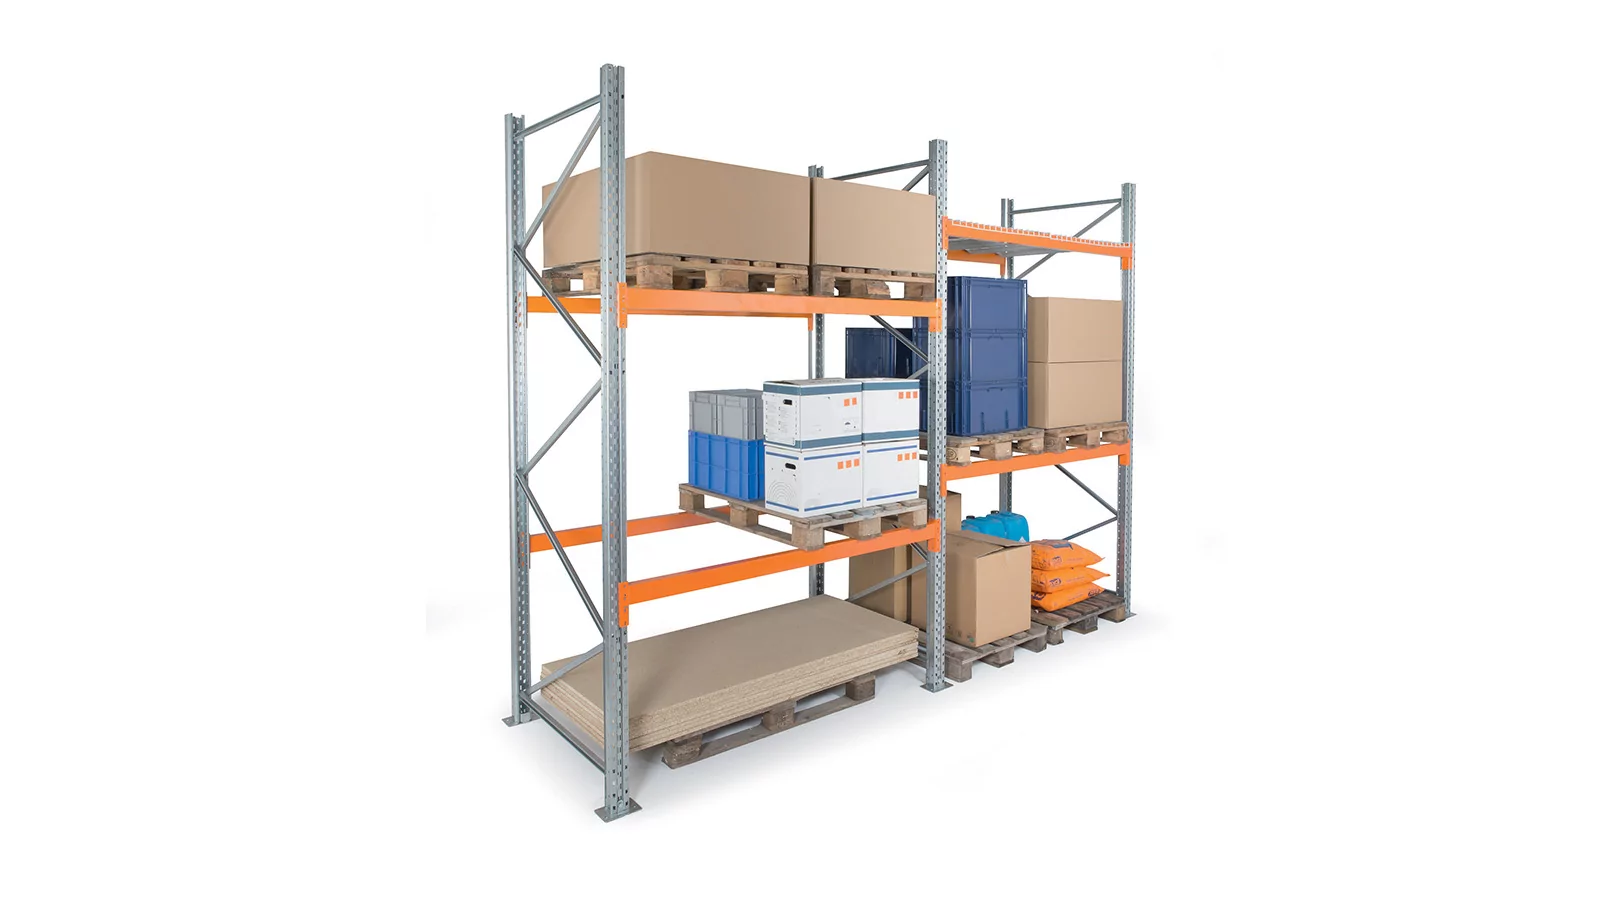 Rayonnage spécial stockage palettes - Planorga